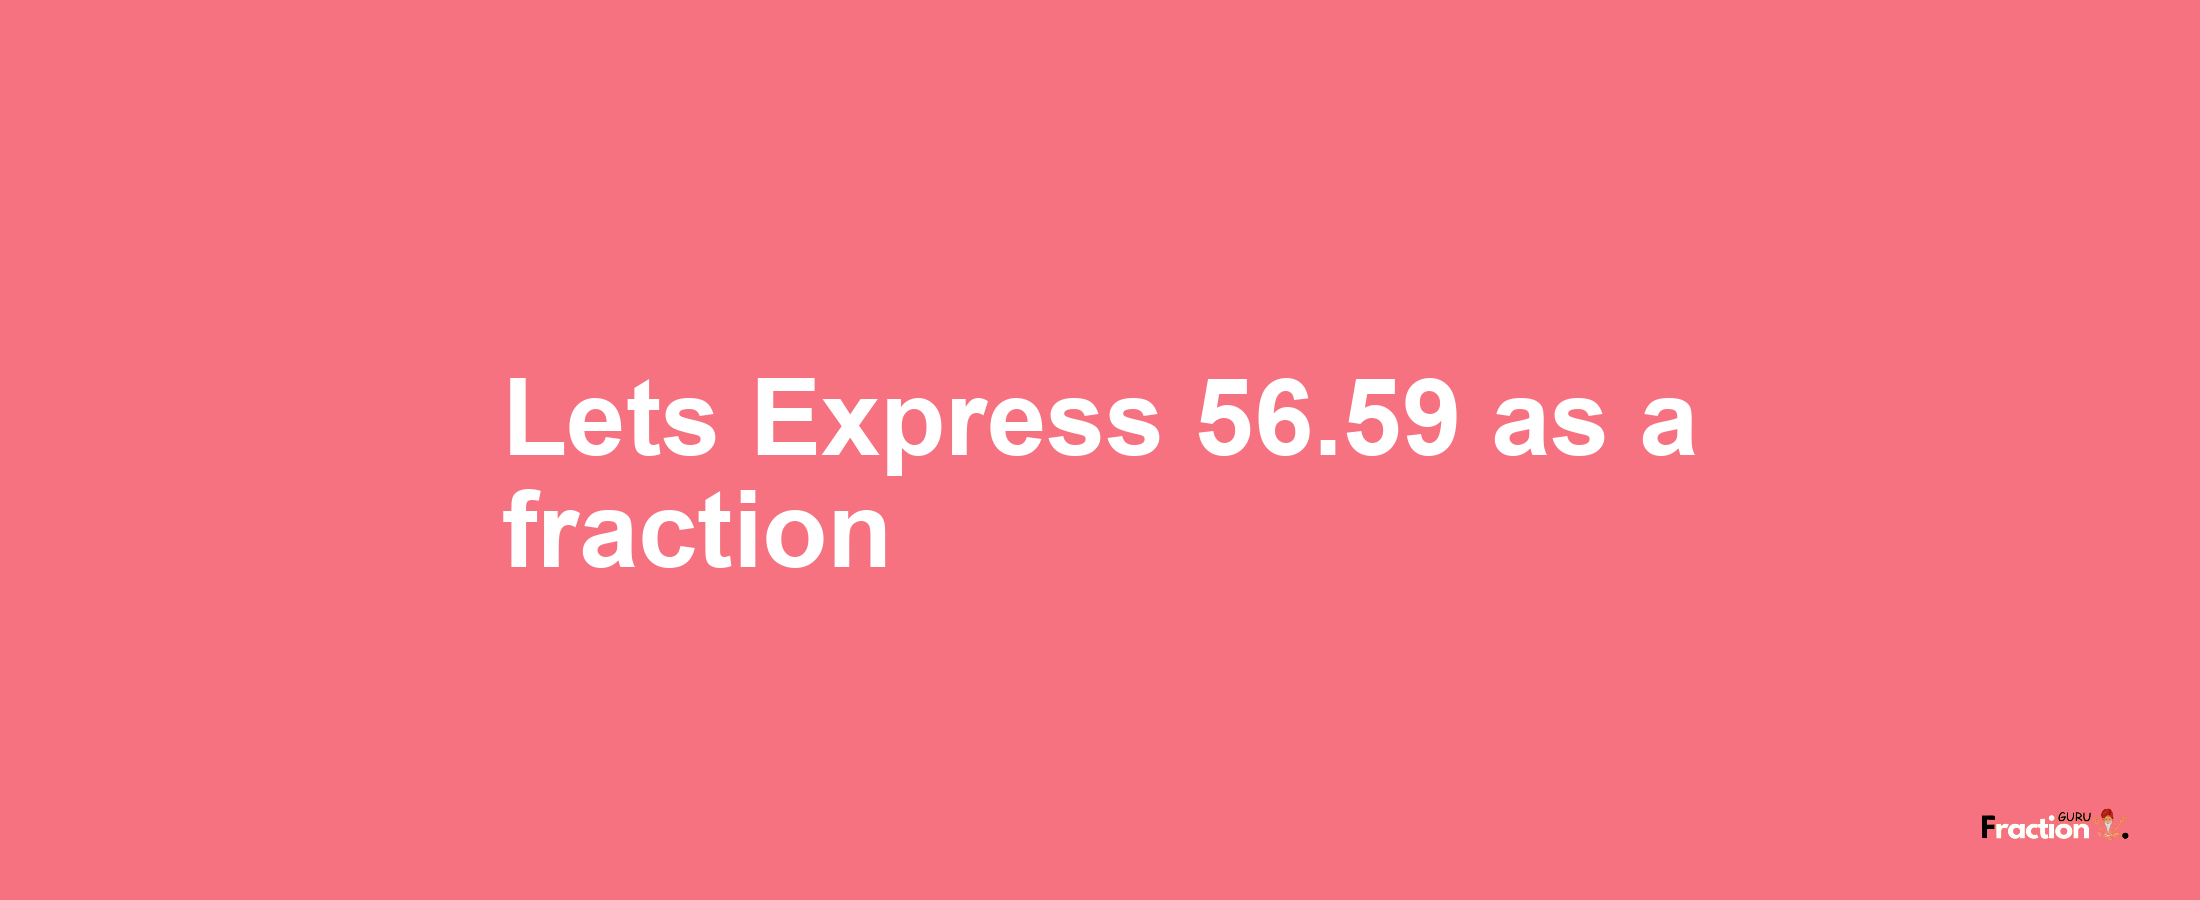 Lets Express 56.59 as afraction